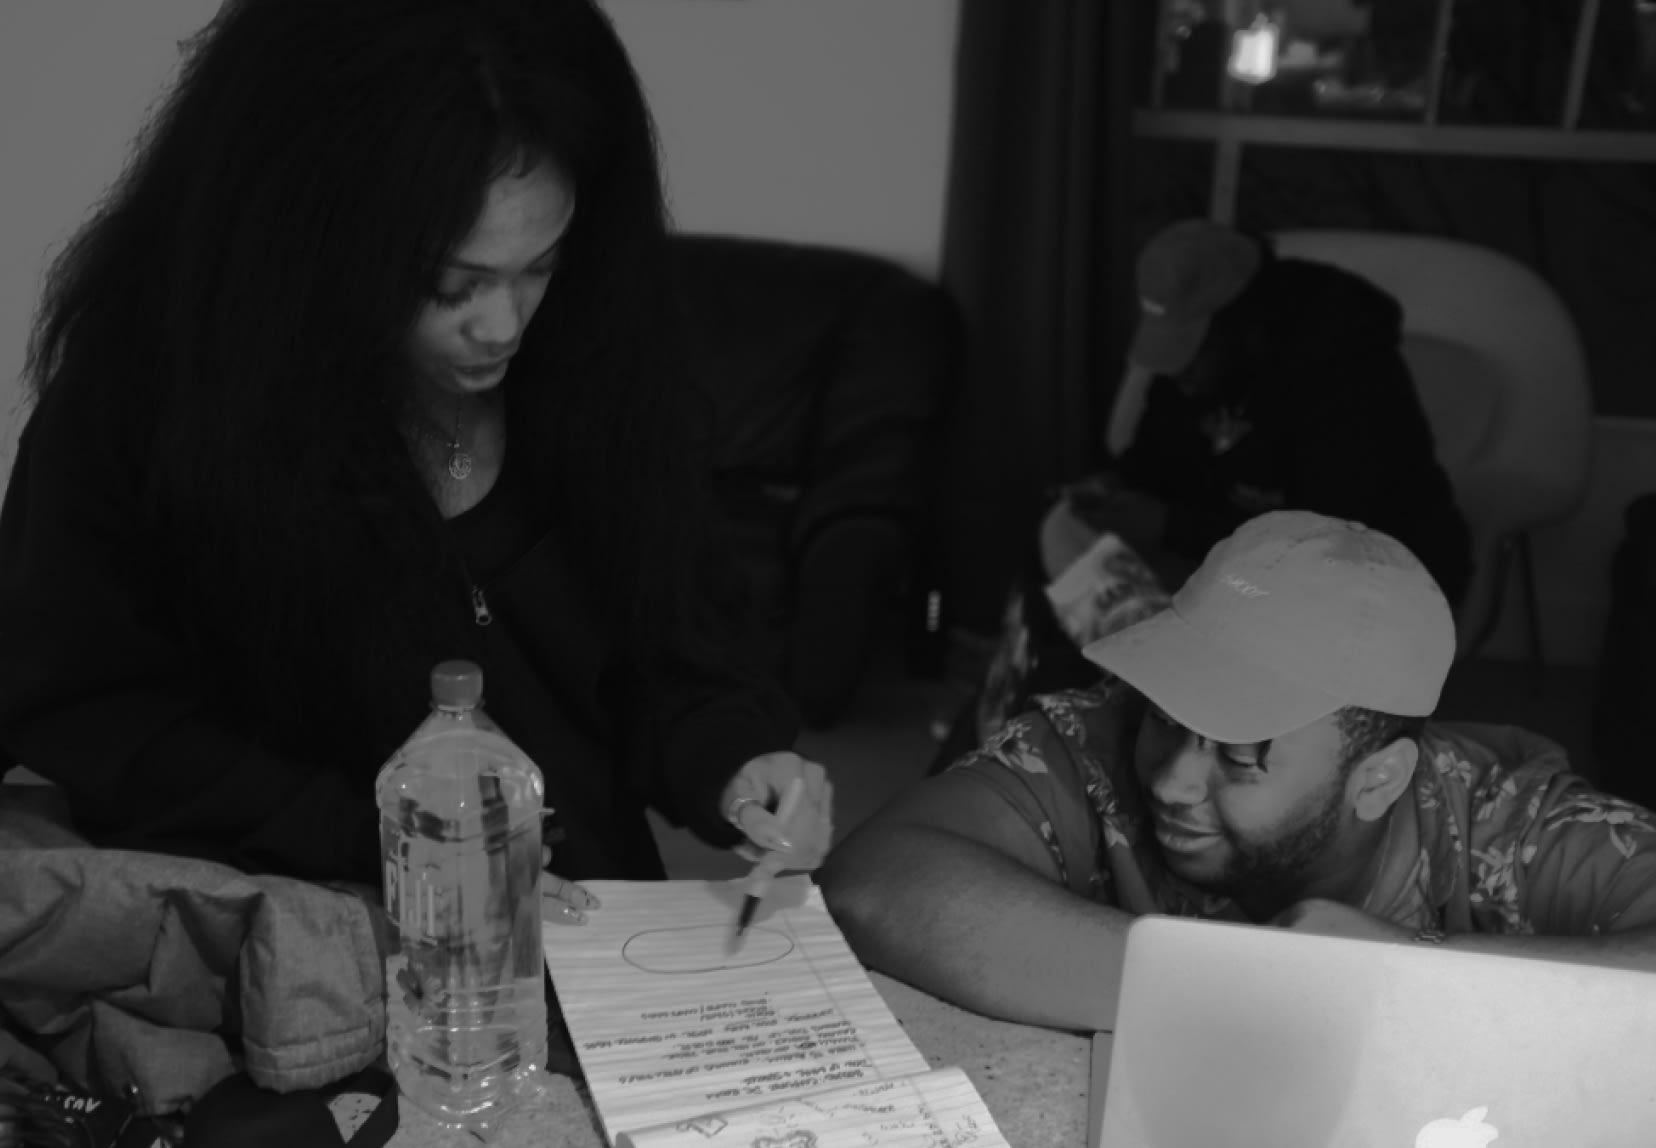 SZA working on a design on paper.